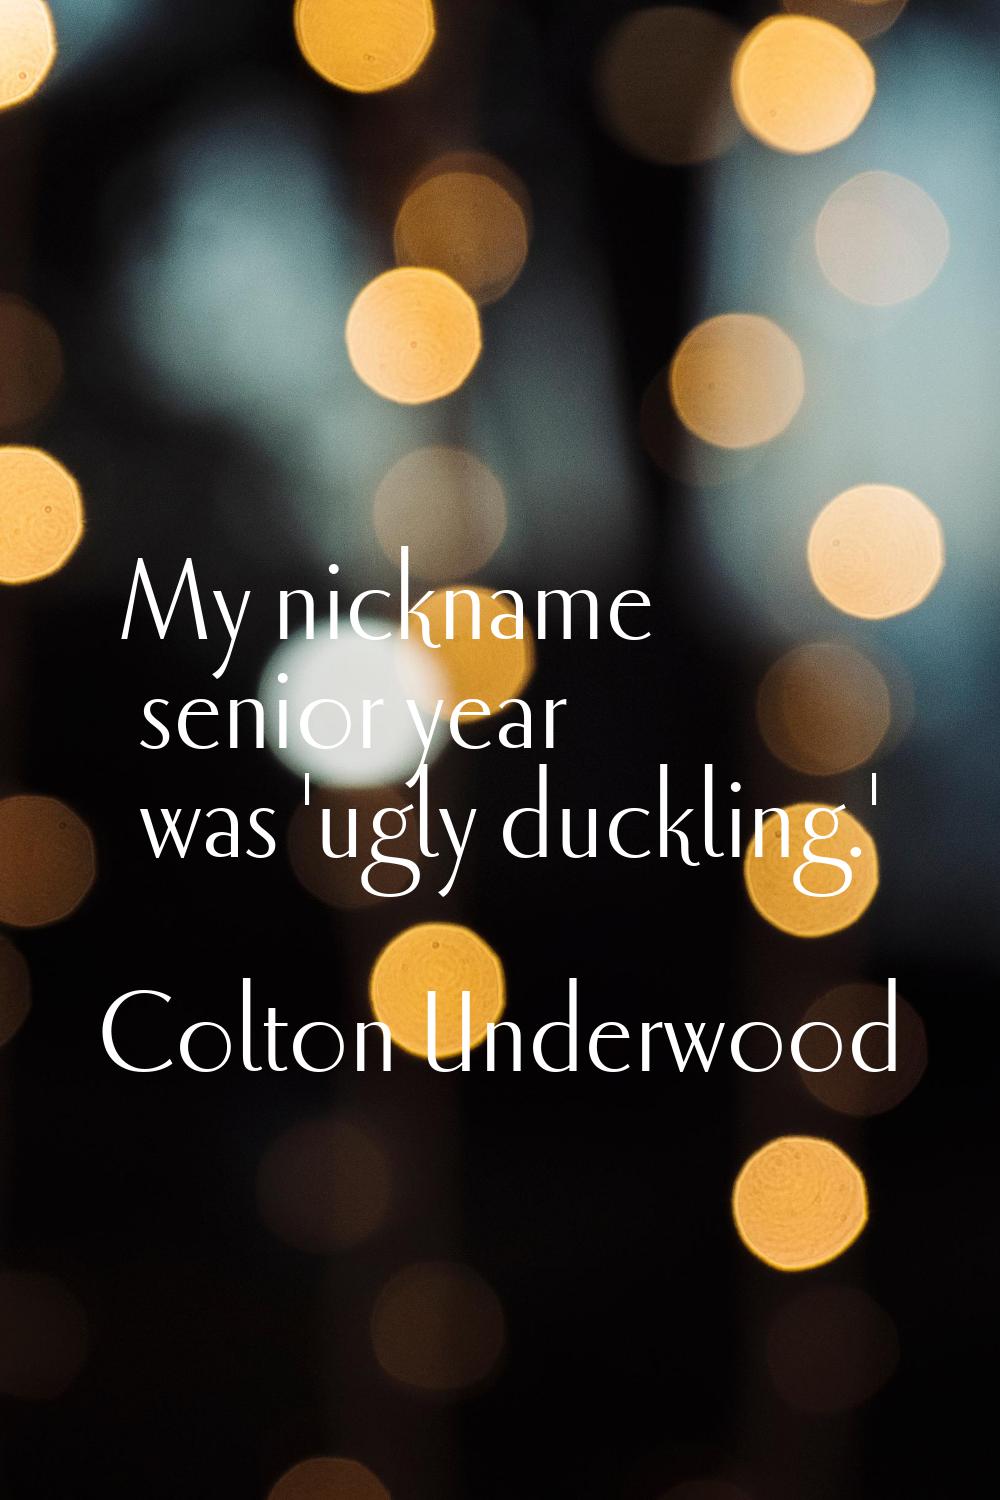 My nickname senior year was 'ugly duckling.'